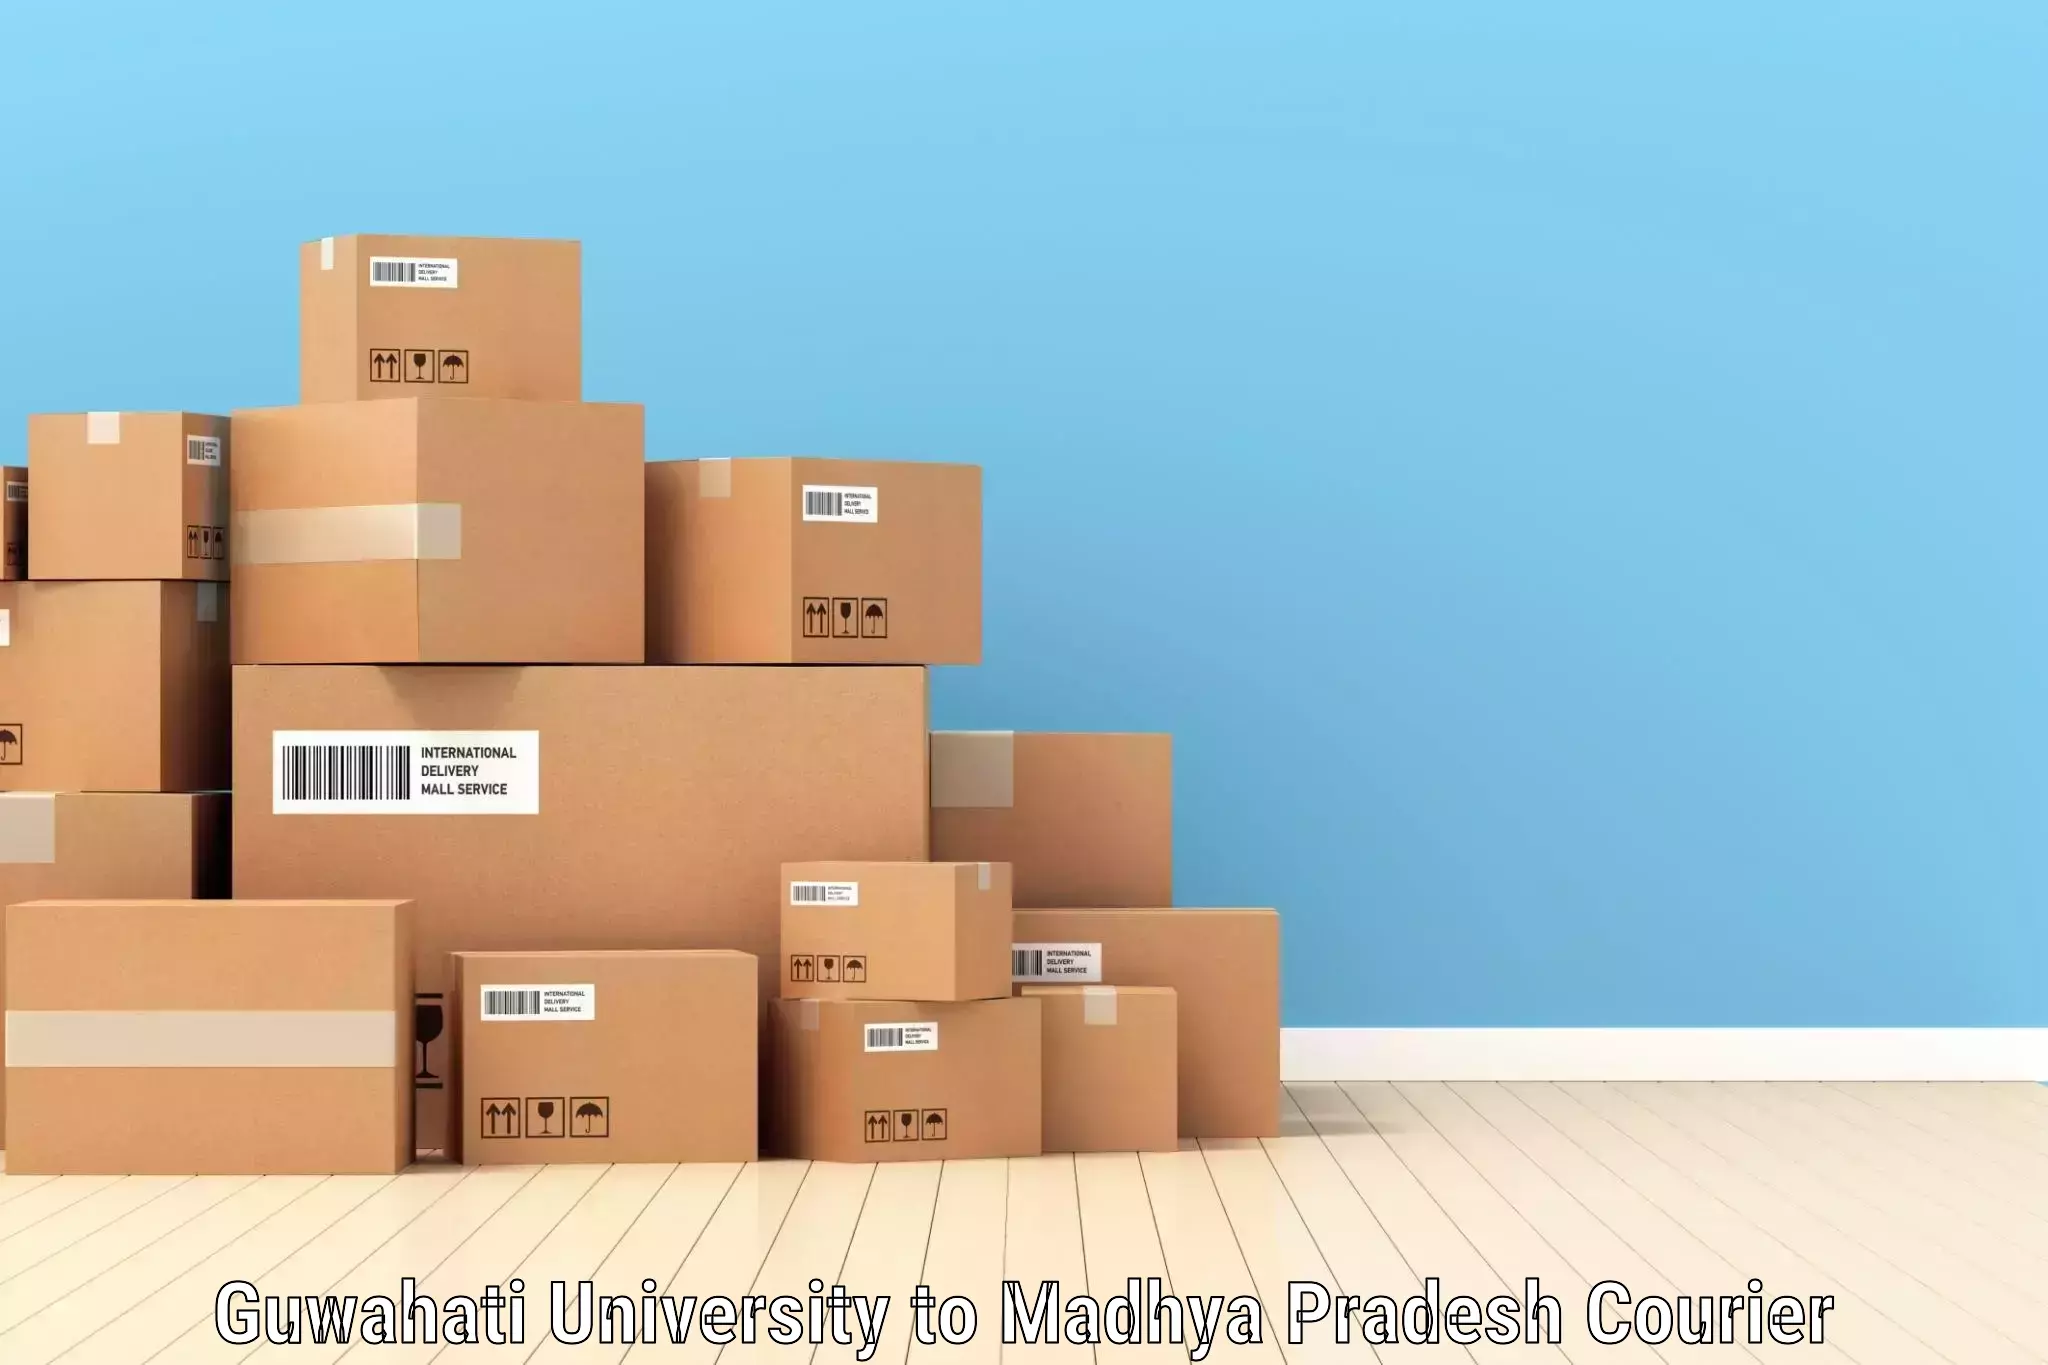 Flexible shipping options in Guwahati University to Neemuch